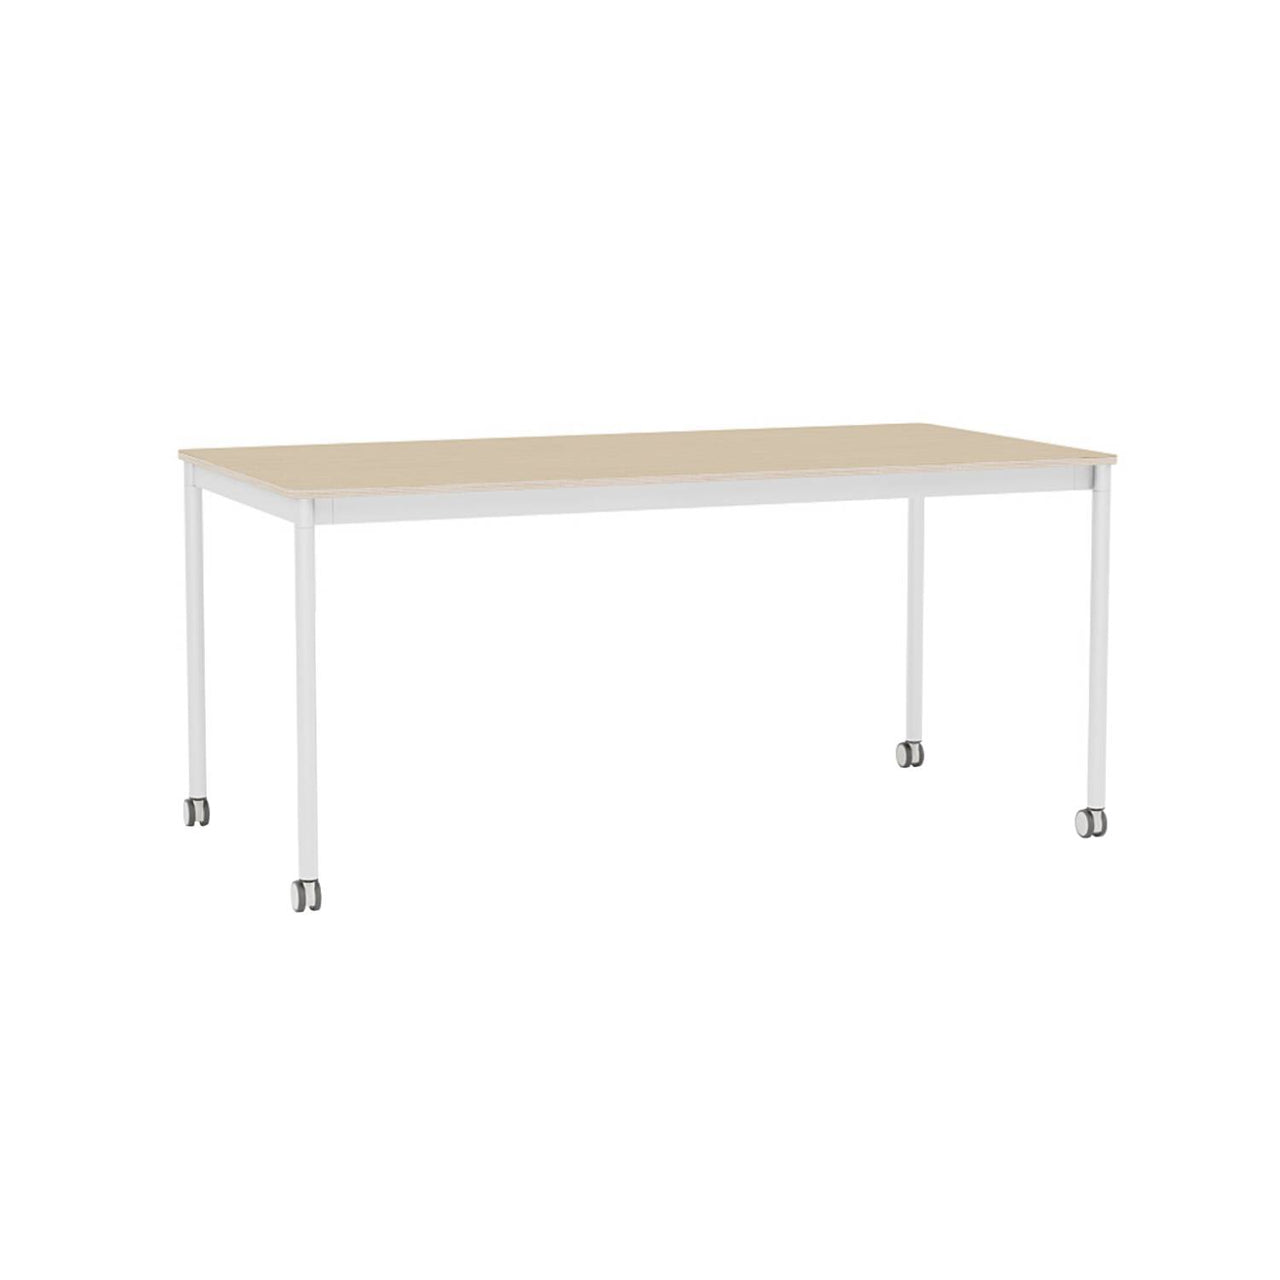 Base Table with Castors: 63